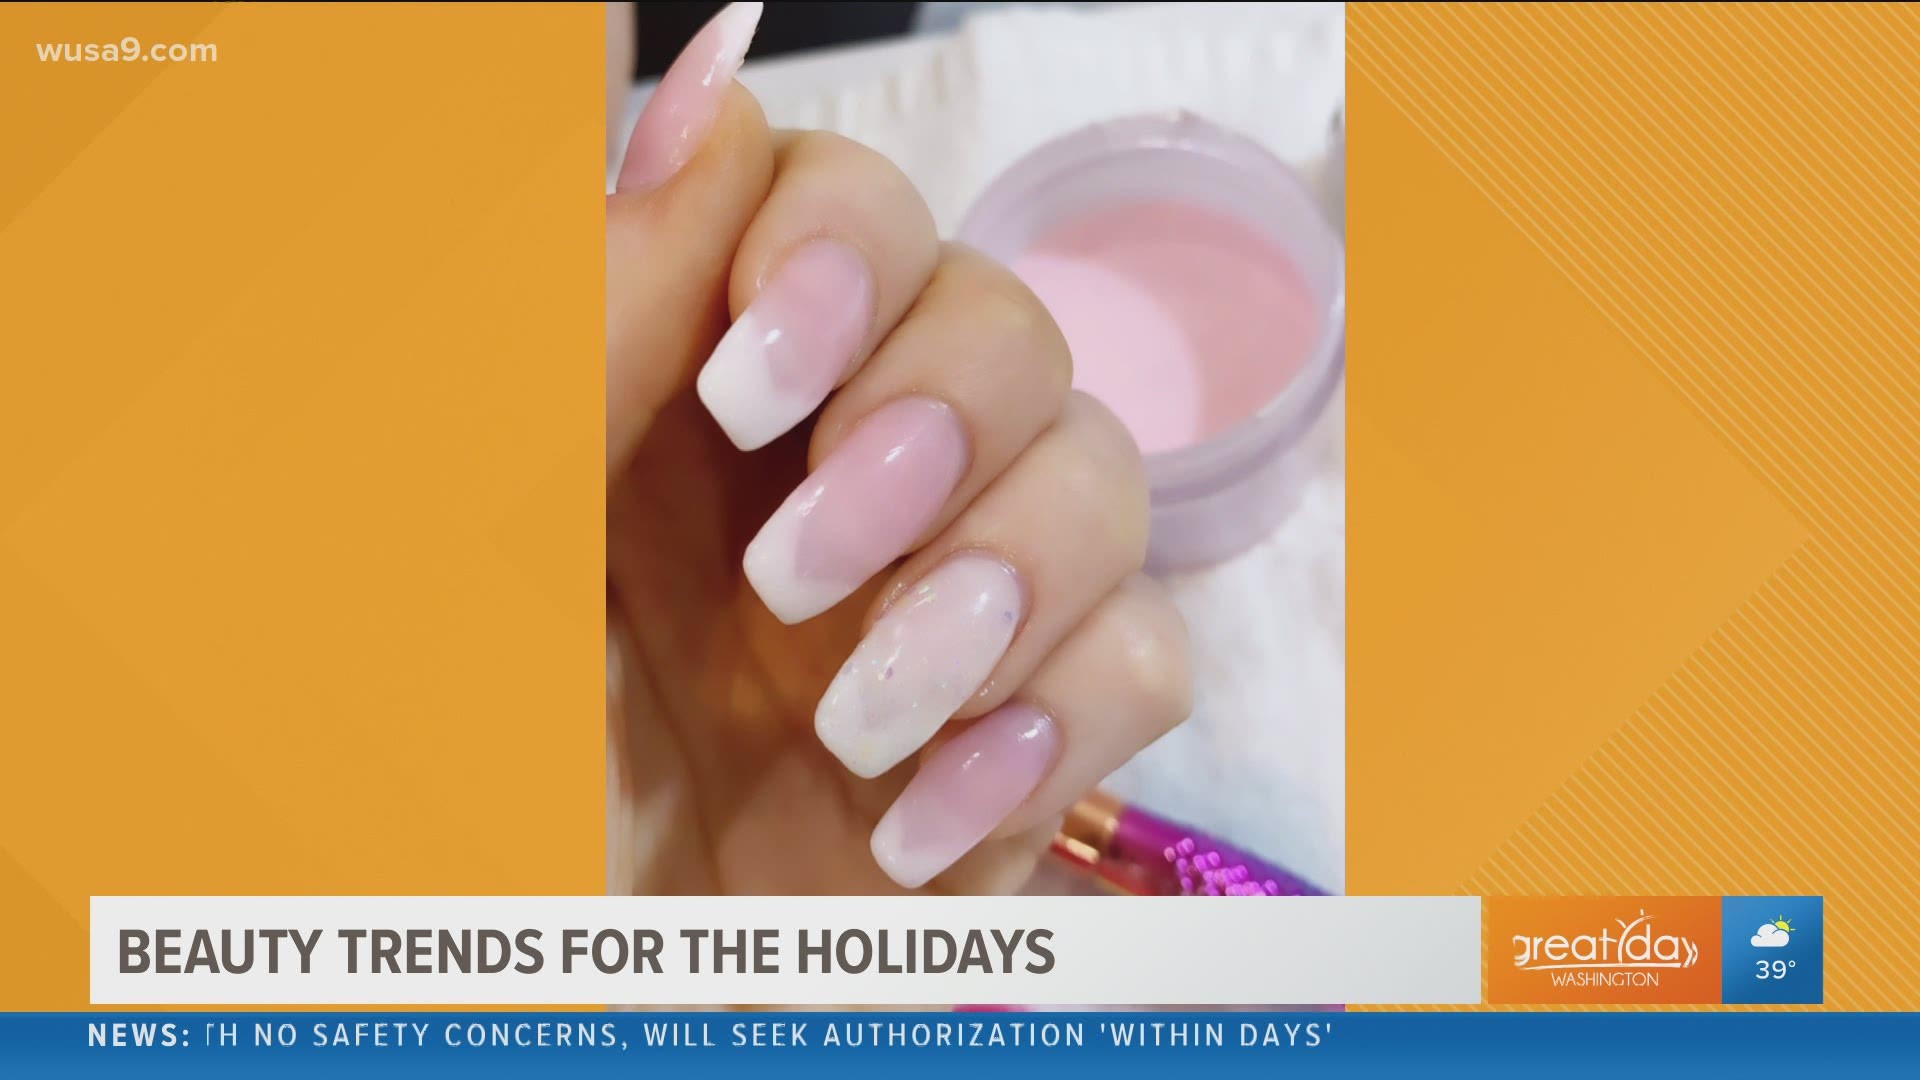 Mary Taylor, owner of Spa Noa in Reston shares some of this season's beauty trends.